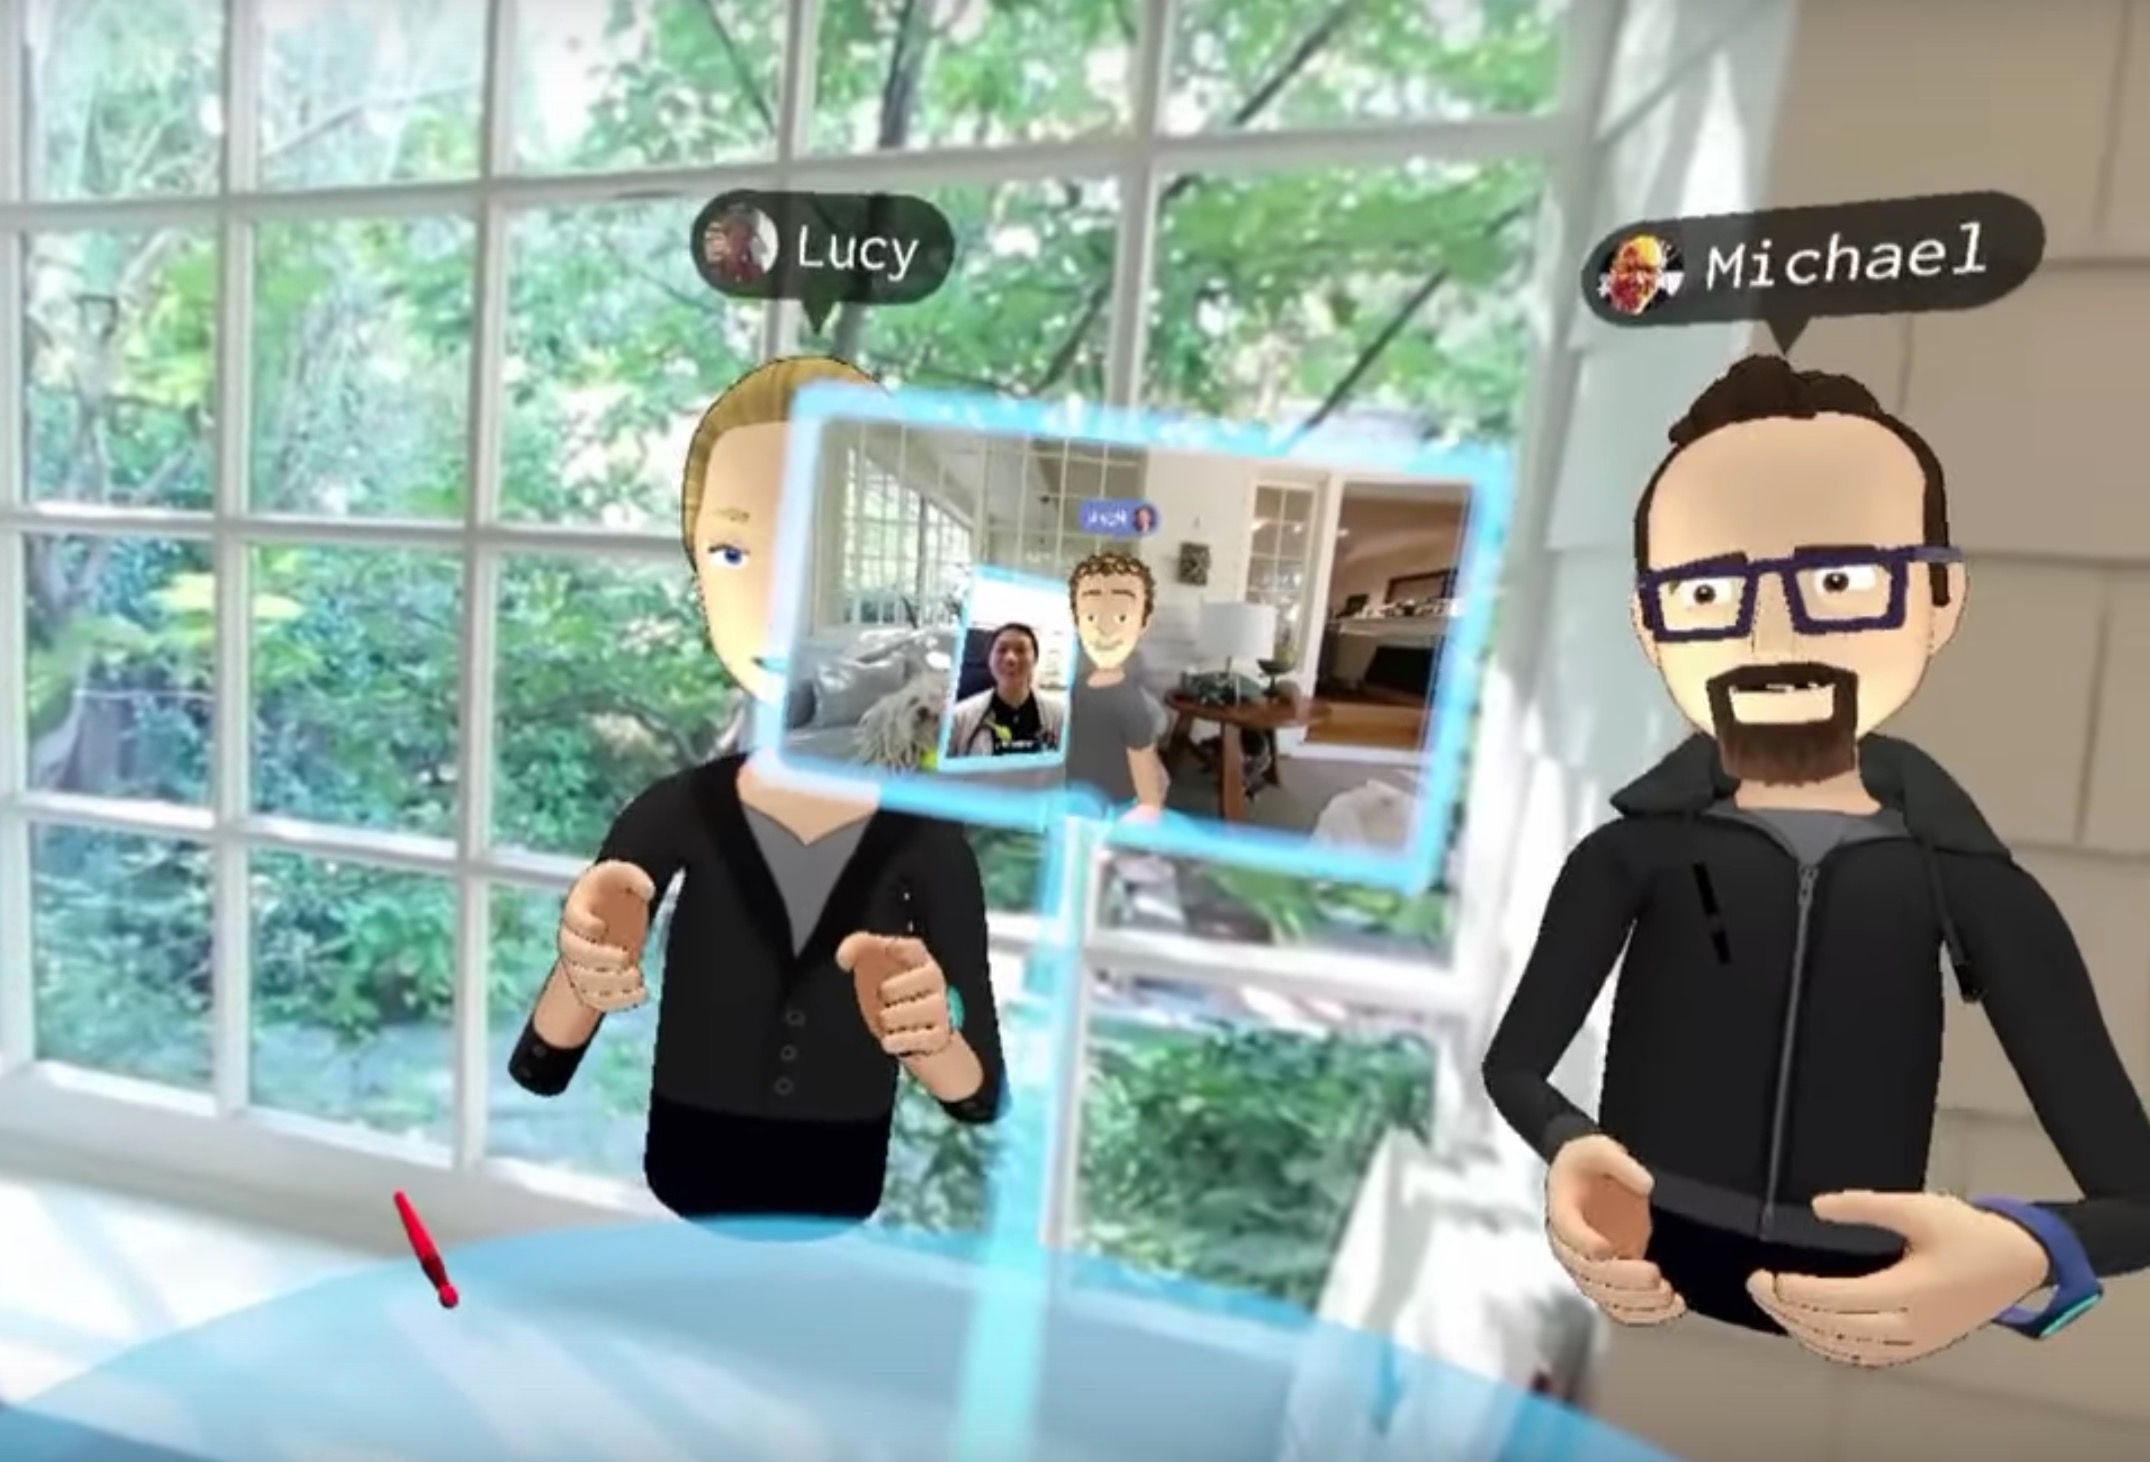 oculus rooms and parties explained how does facebook see us being social in vr image 5